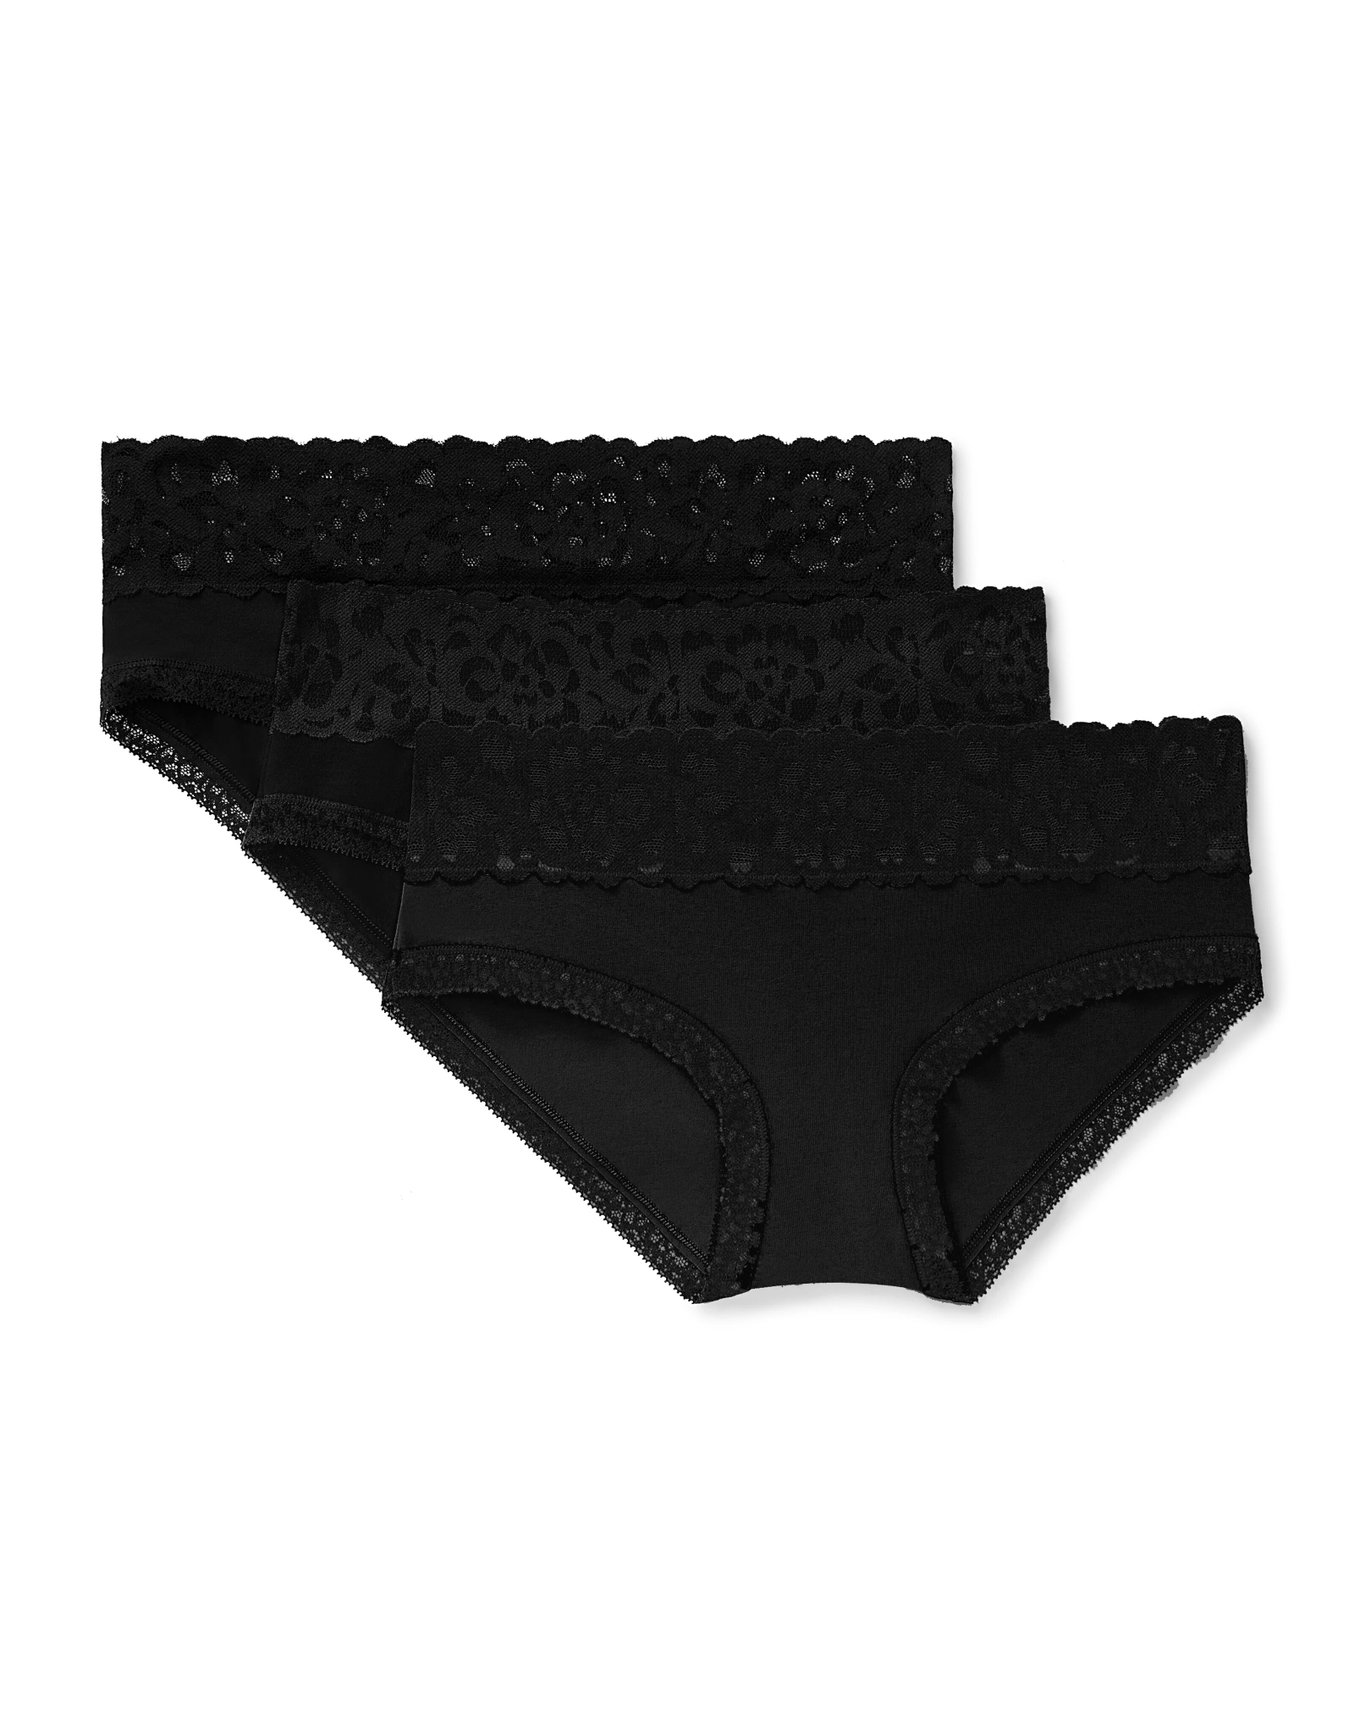 Millie Cotton Pack Hipster Black 2 Hipster Panties (Pack of 3